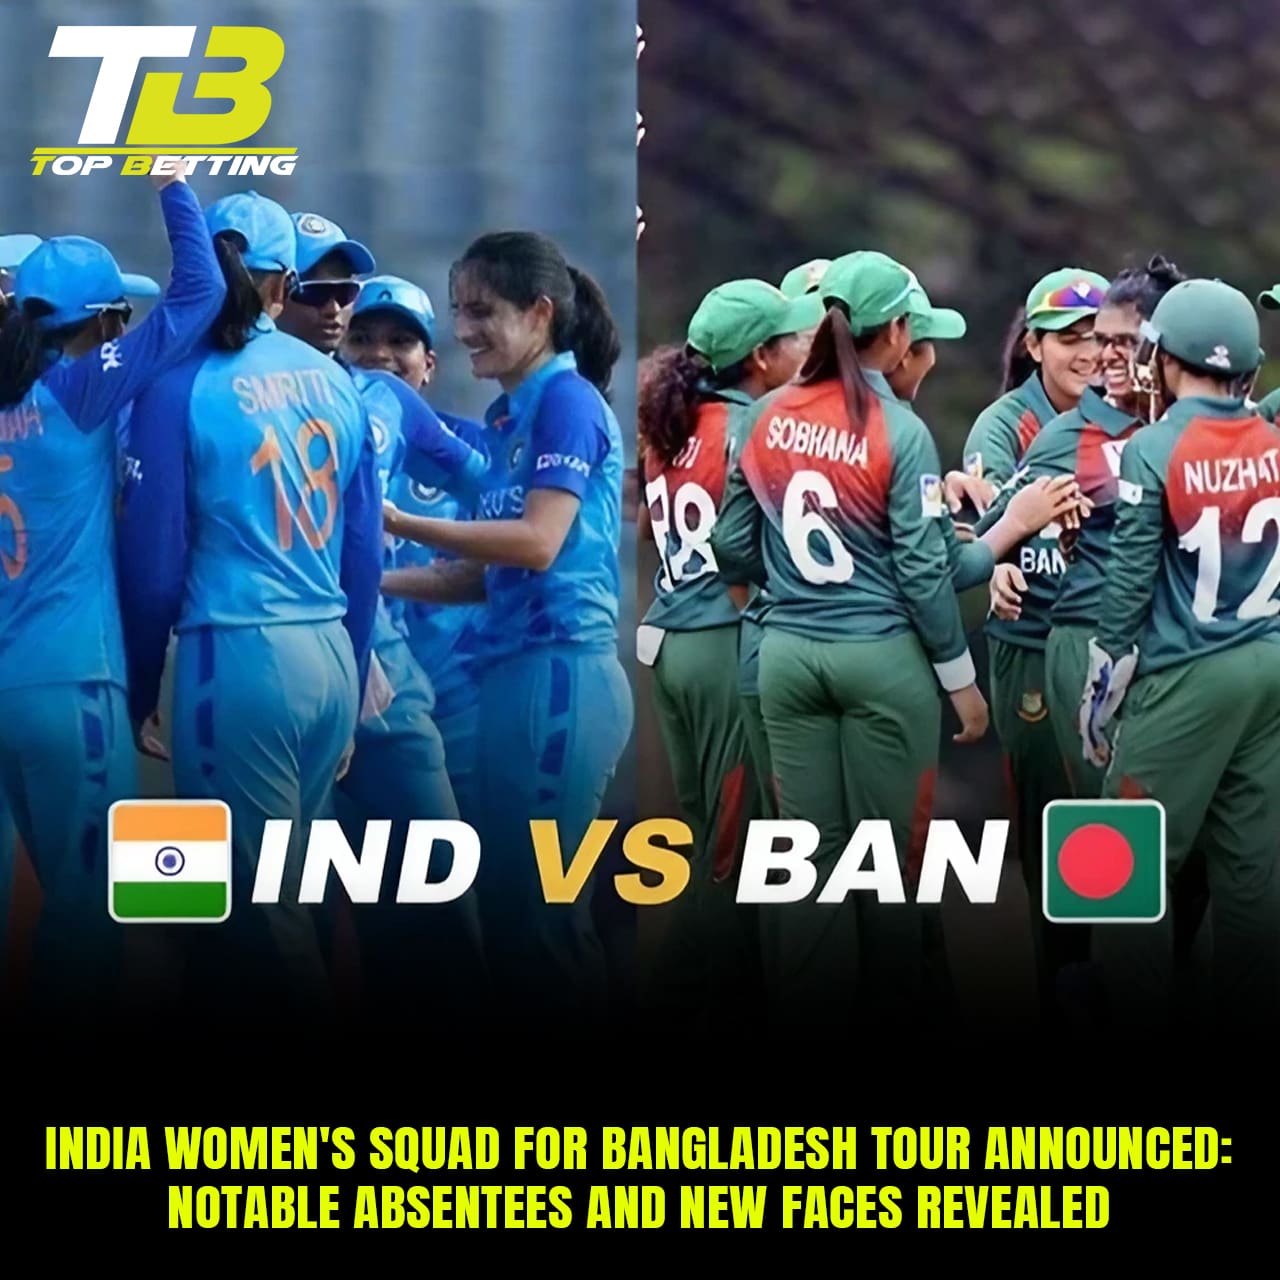 India Women’s Squad for Bangladesh Tour Announced: Notable Absentees and New Faces Revealed